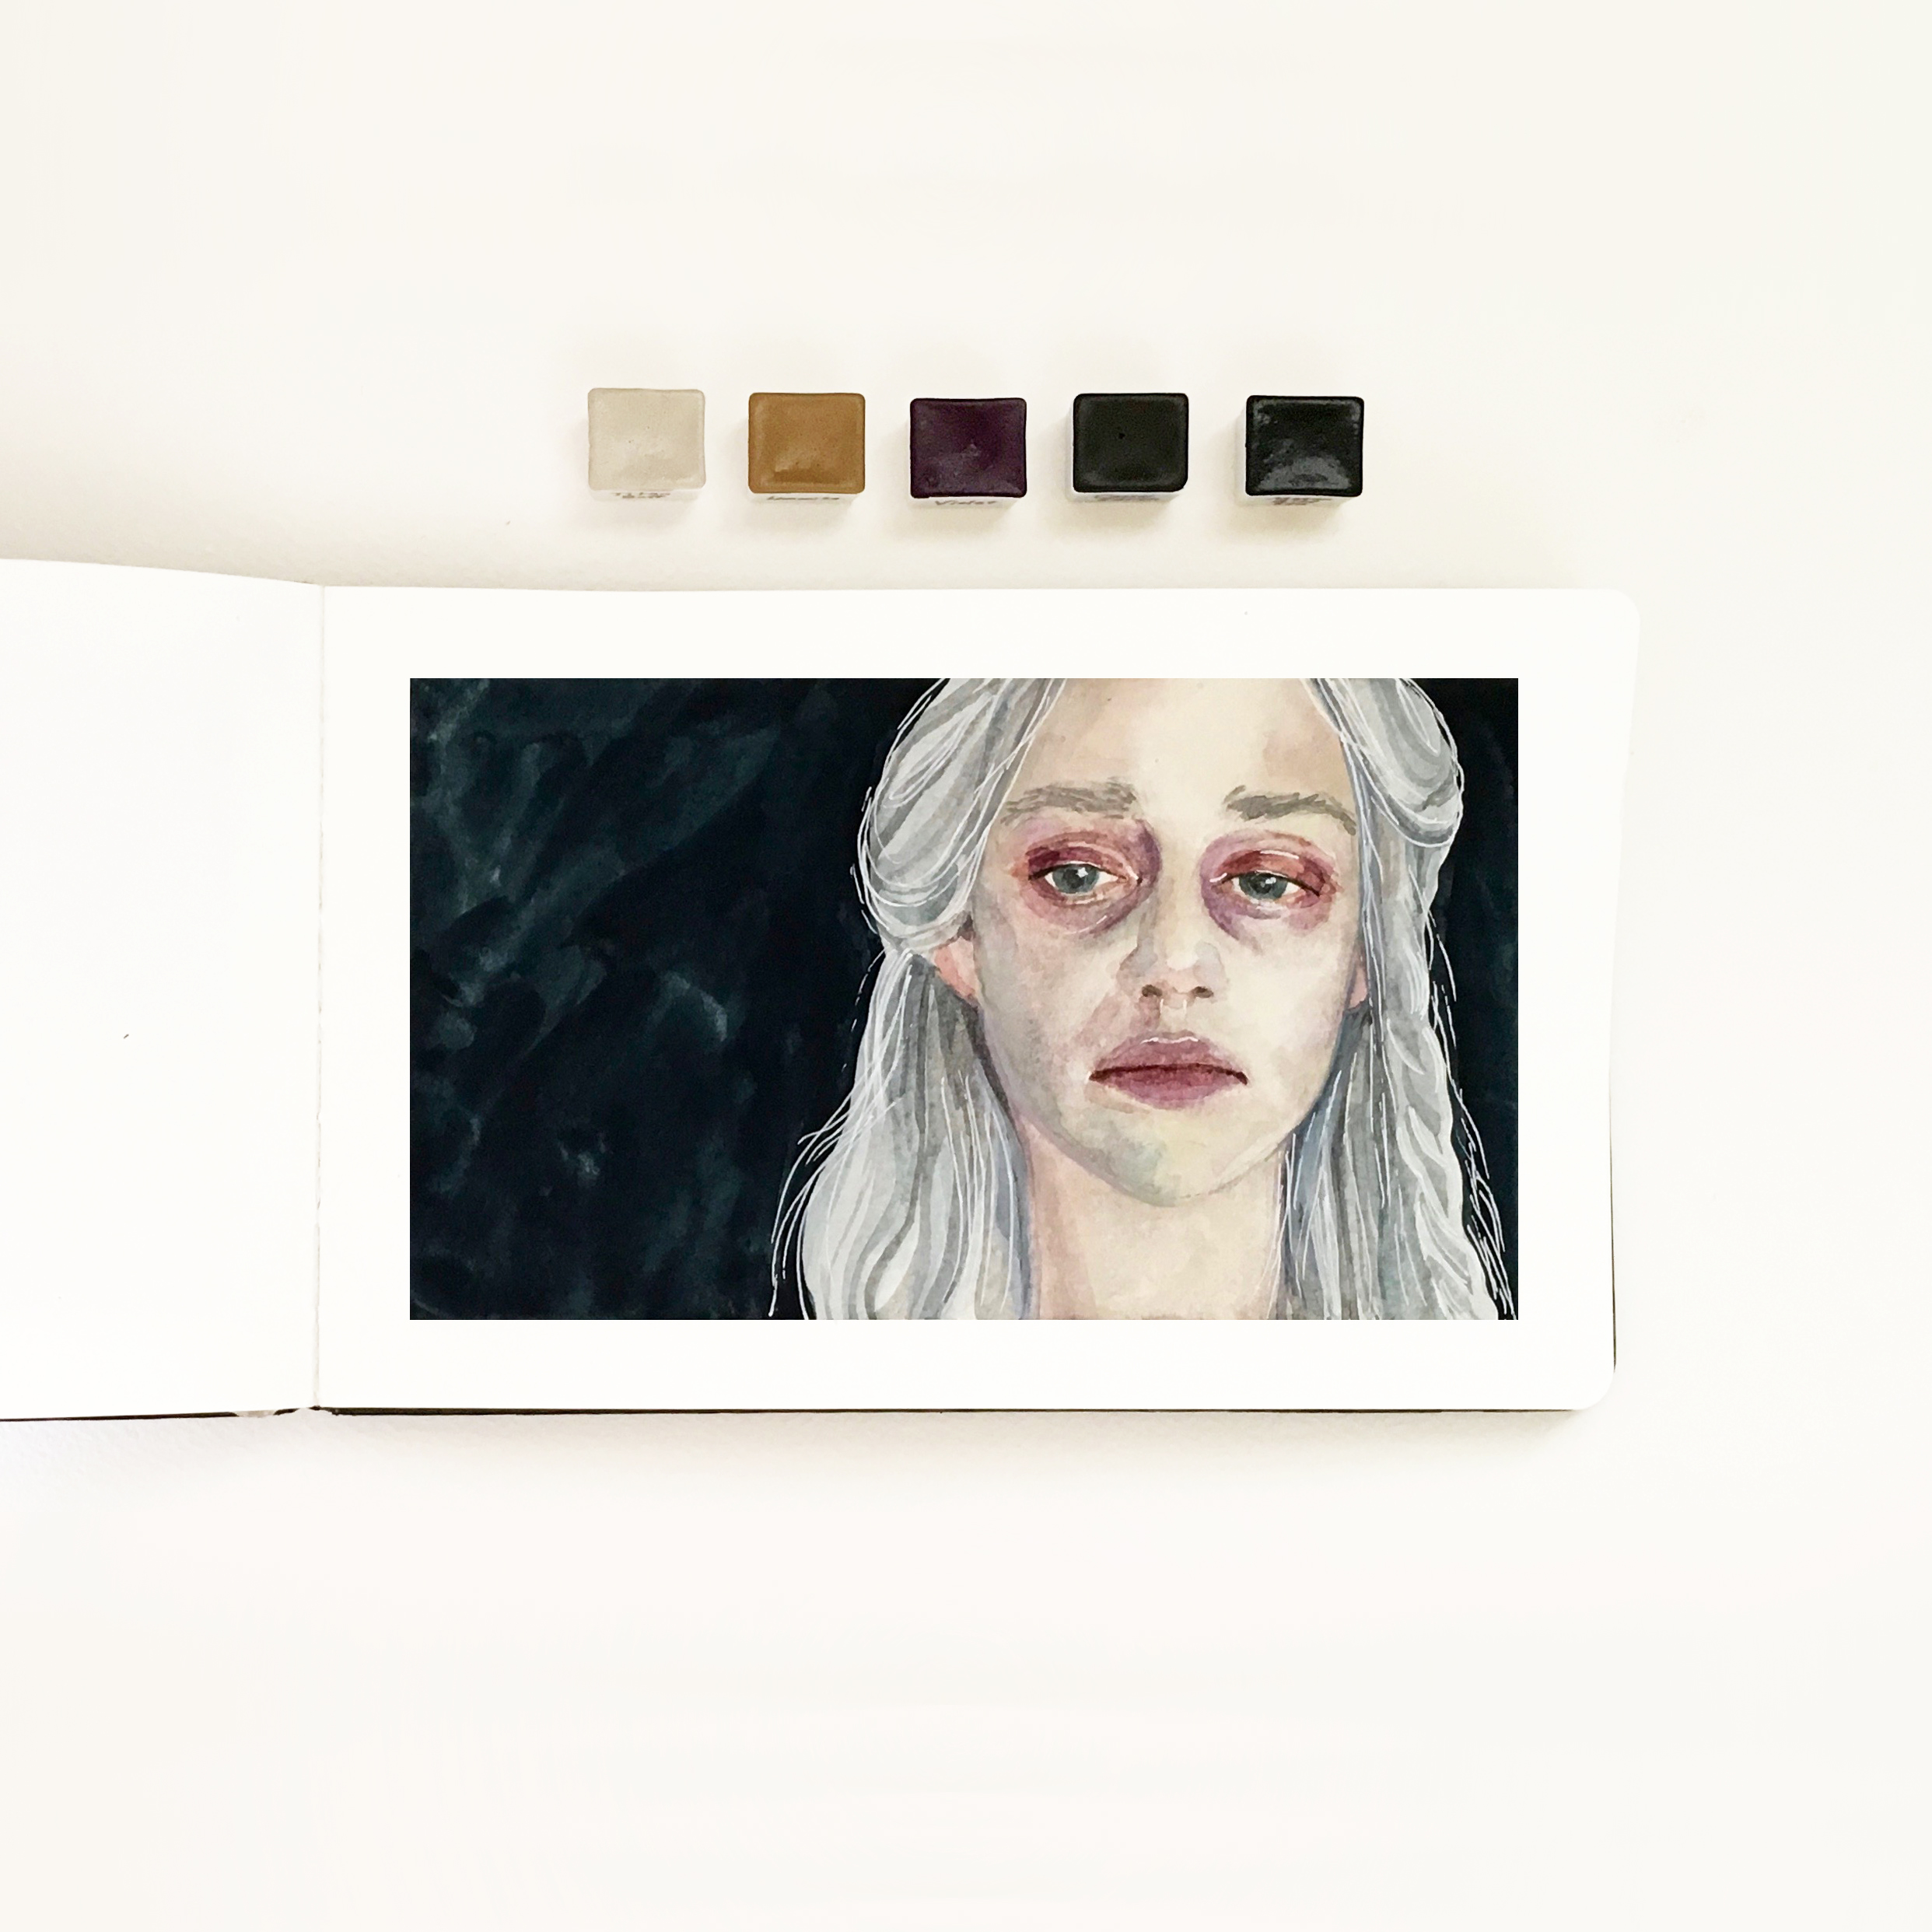 Portrait of Daenerys from the Game of Thrones